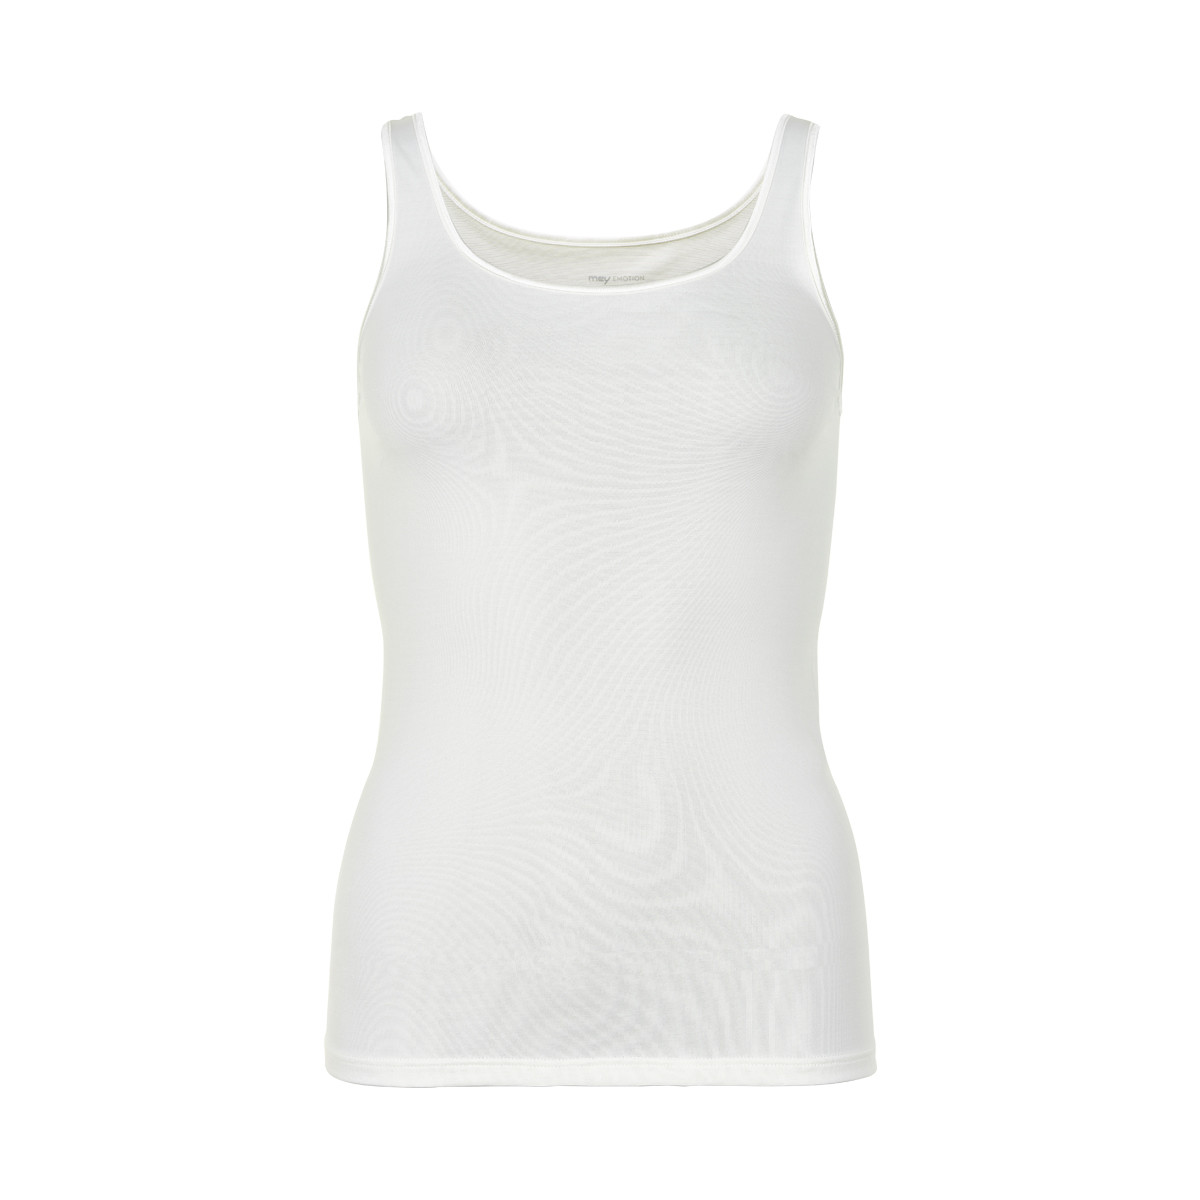 Mey Emotion Tank Top Champagne 55204 (Champagne, 36)